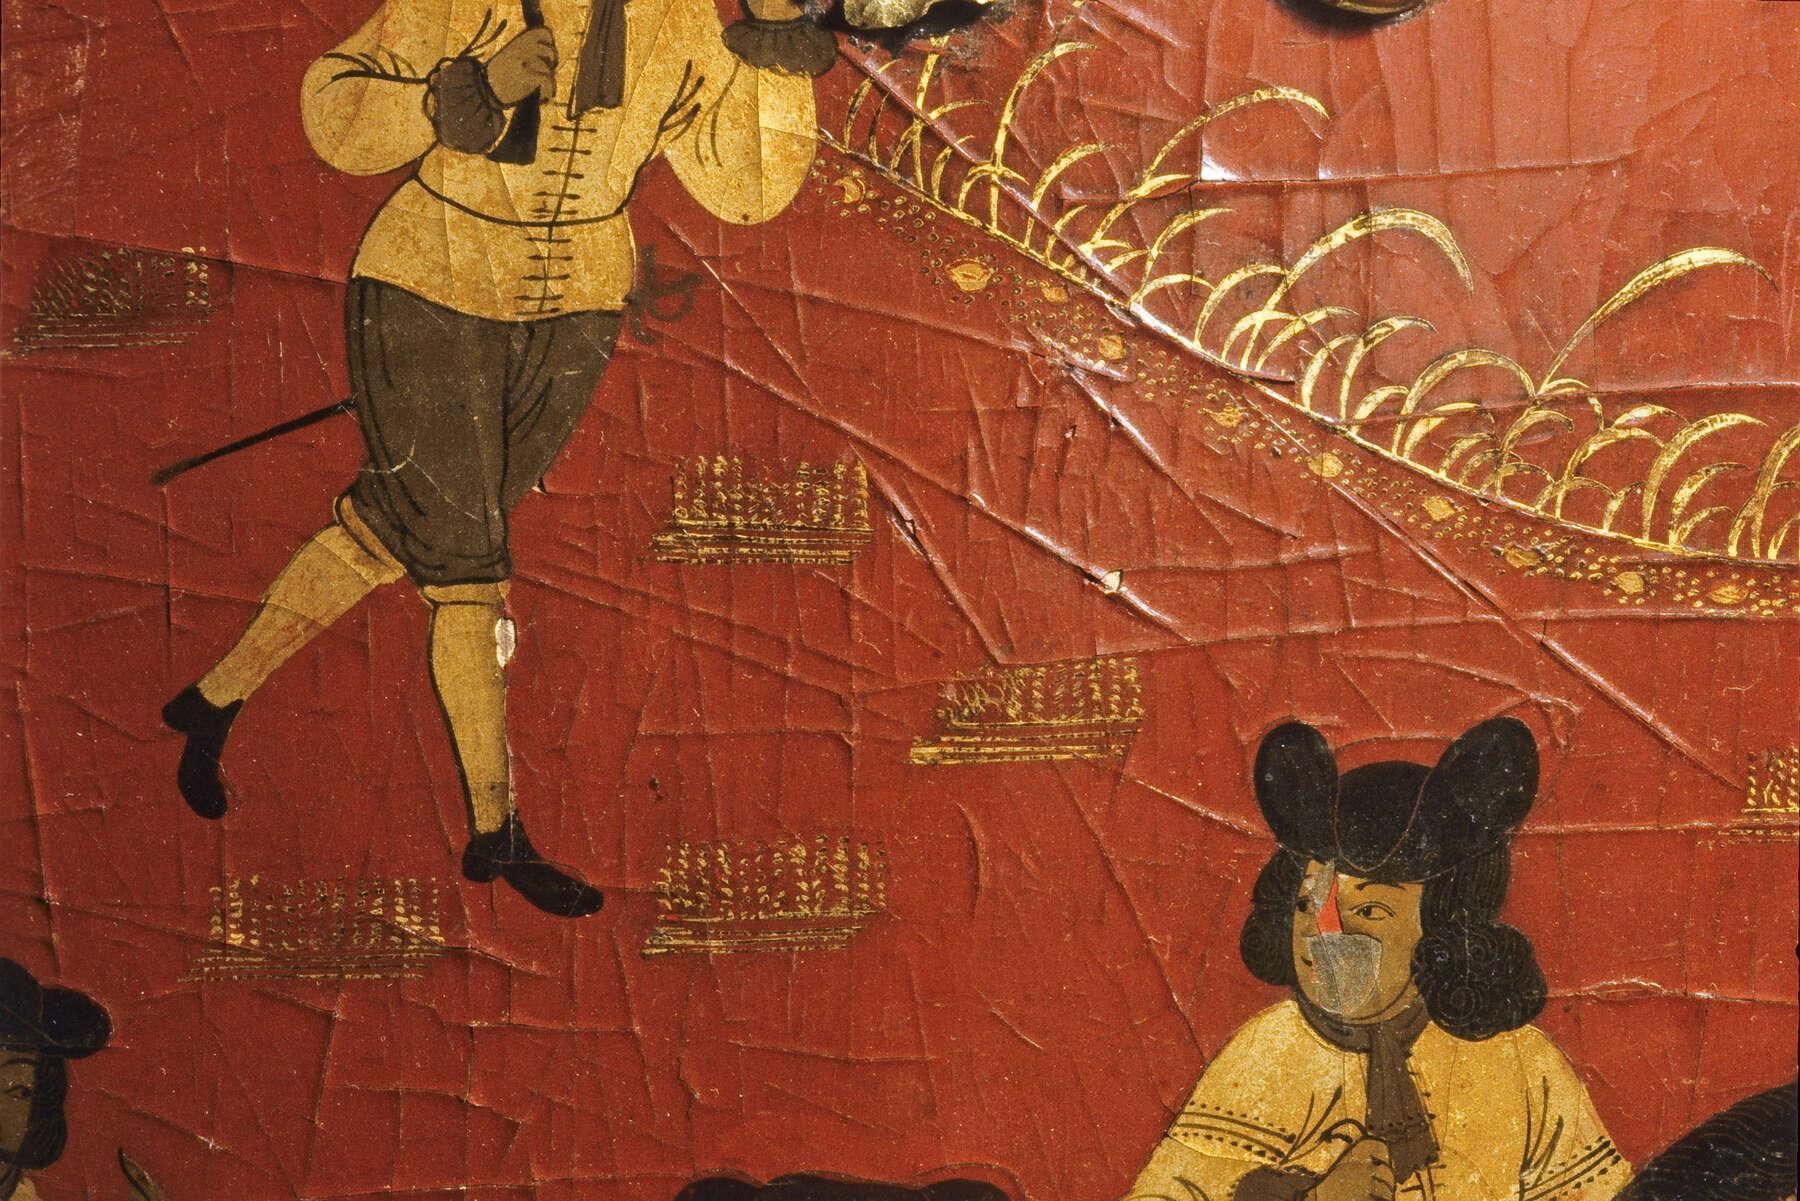 detail of one of the lacquer scenes, highlighting the many raised cracks in the surface